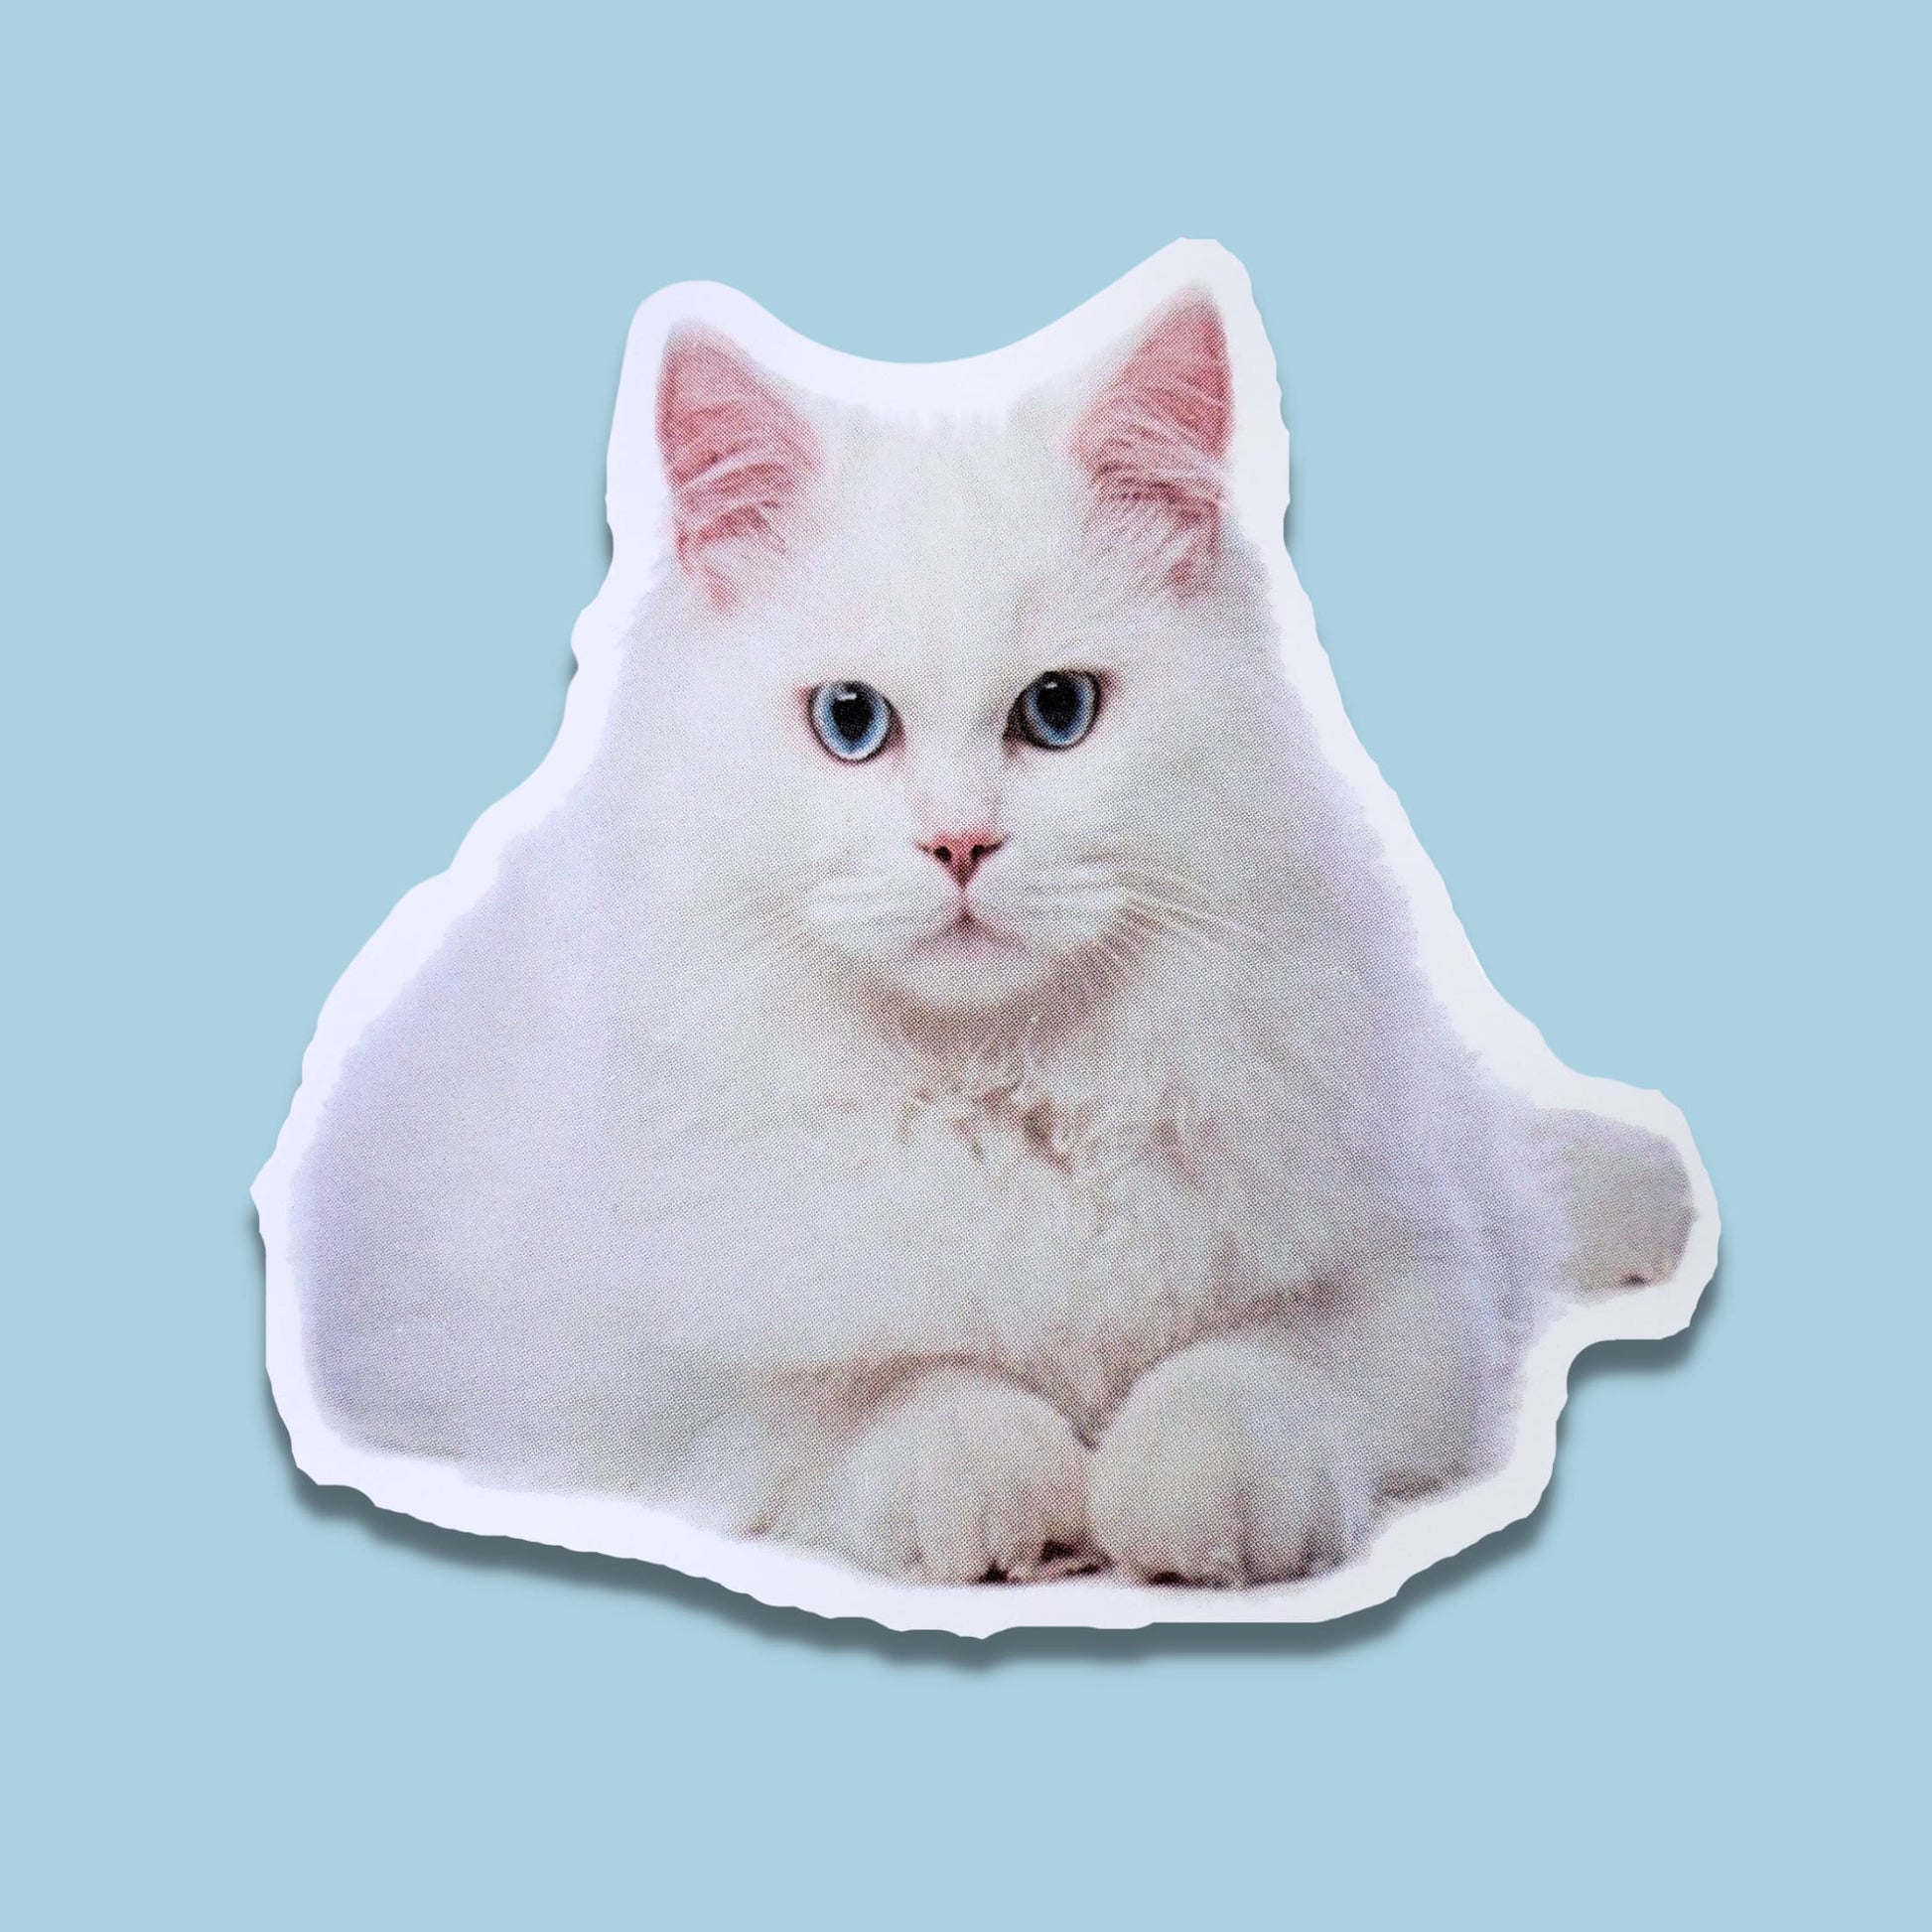 White Cat with Blue Eyes Waterproof Sticker | Focused Feline from Confetti Kitty, Only 1.00